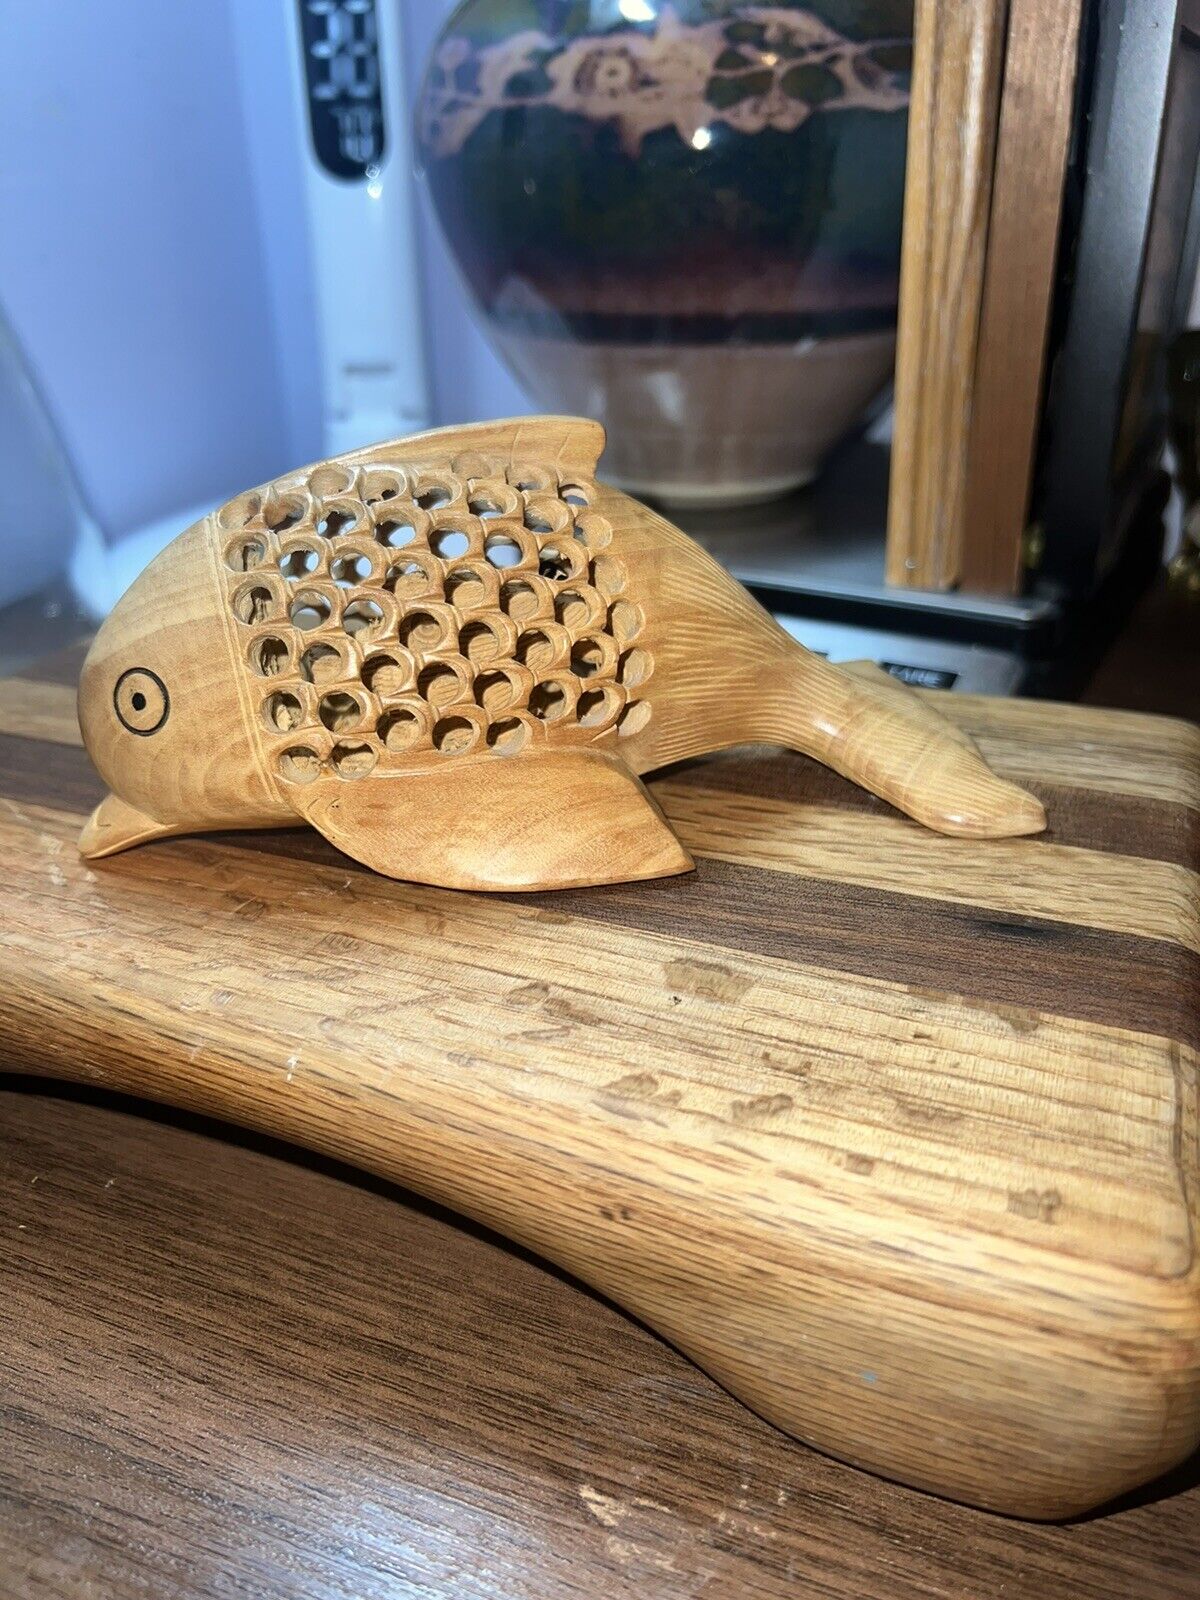 Carved Wooden Fish inside another Fish